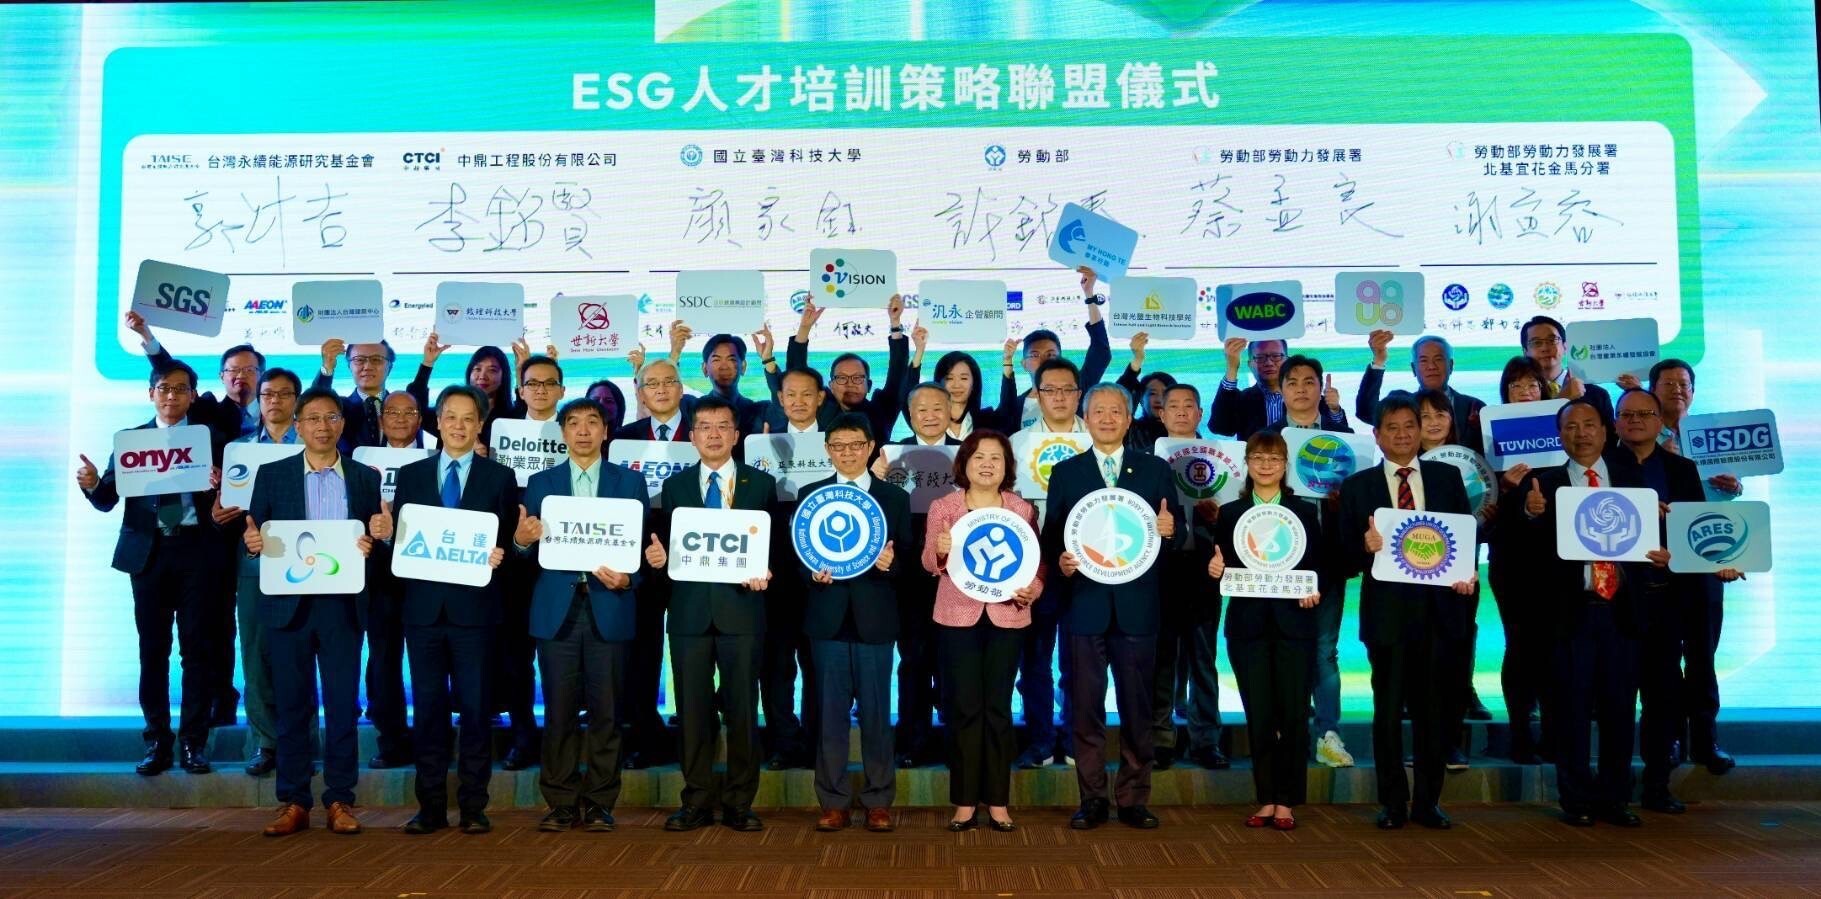 Minister Ming-Chun Hsu of the Ministry of Labor, along with Taiwan Tech and 32 companies, has built a national team for ESG sustainable development.